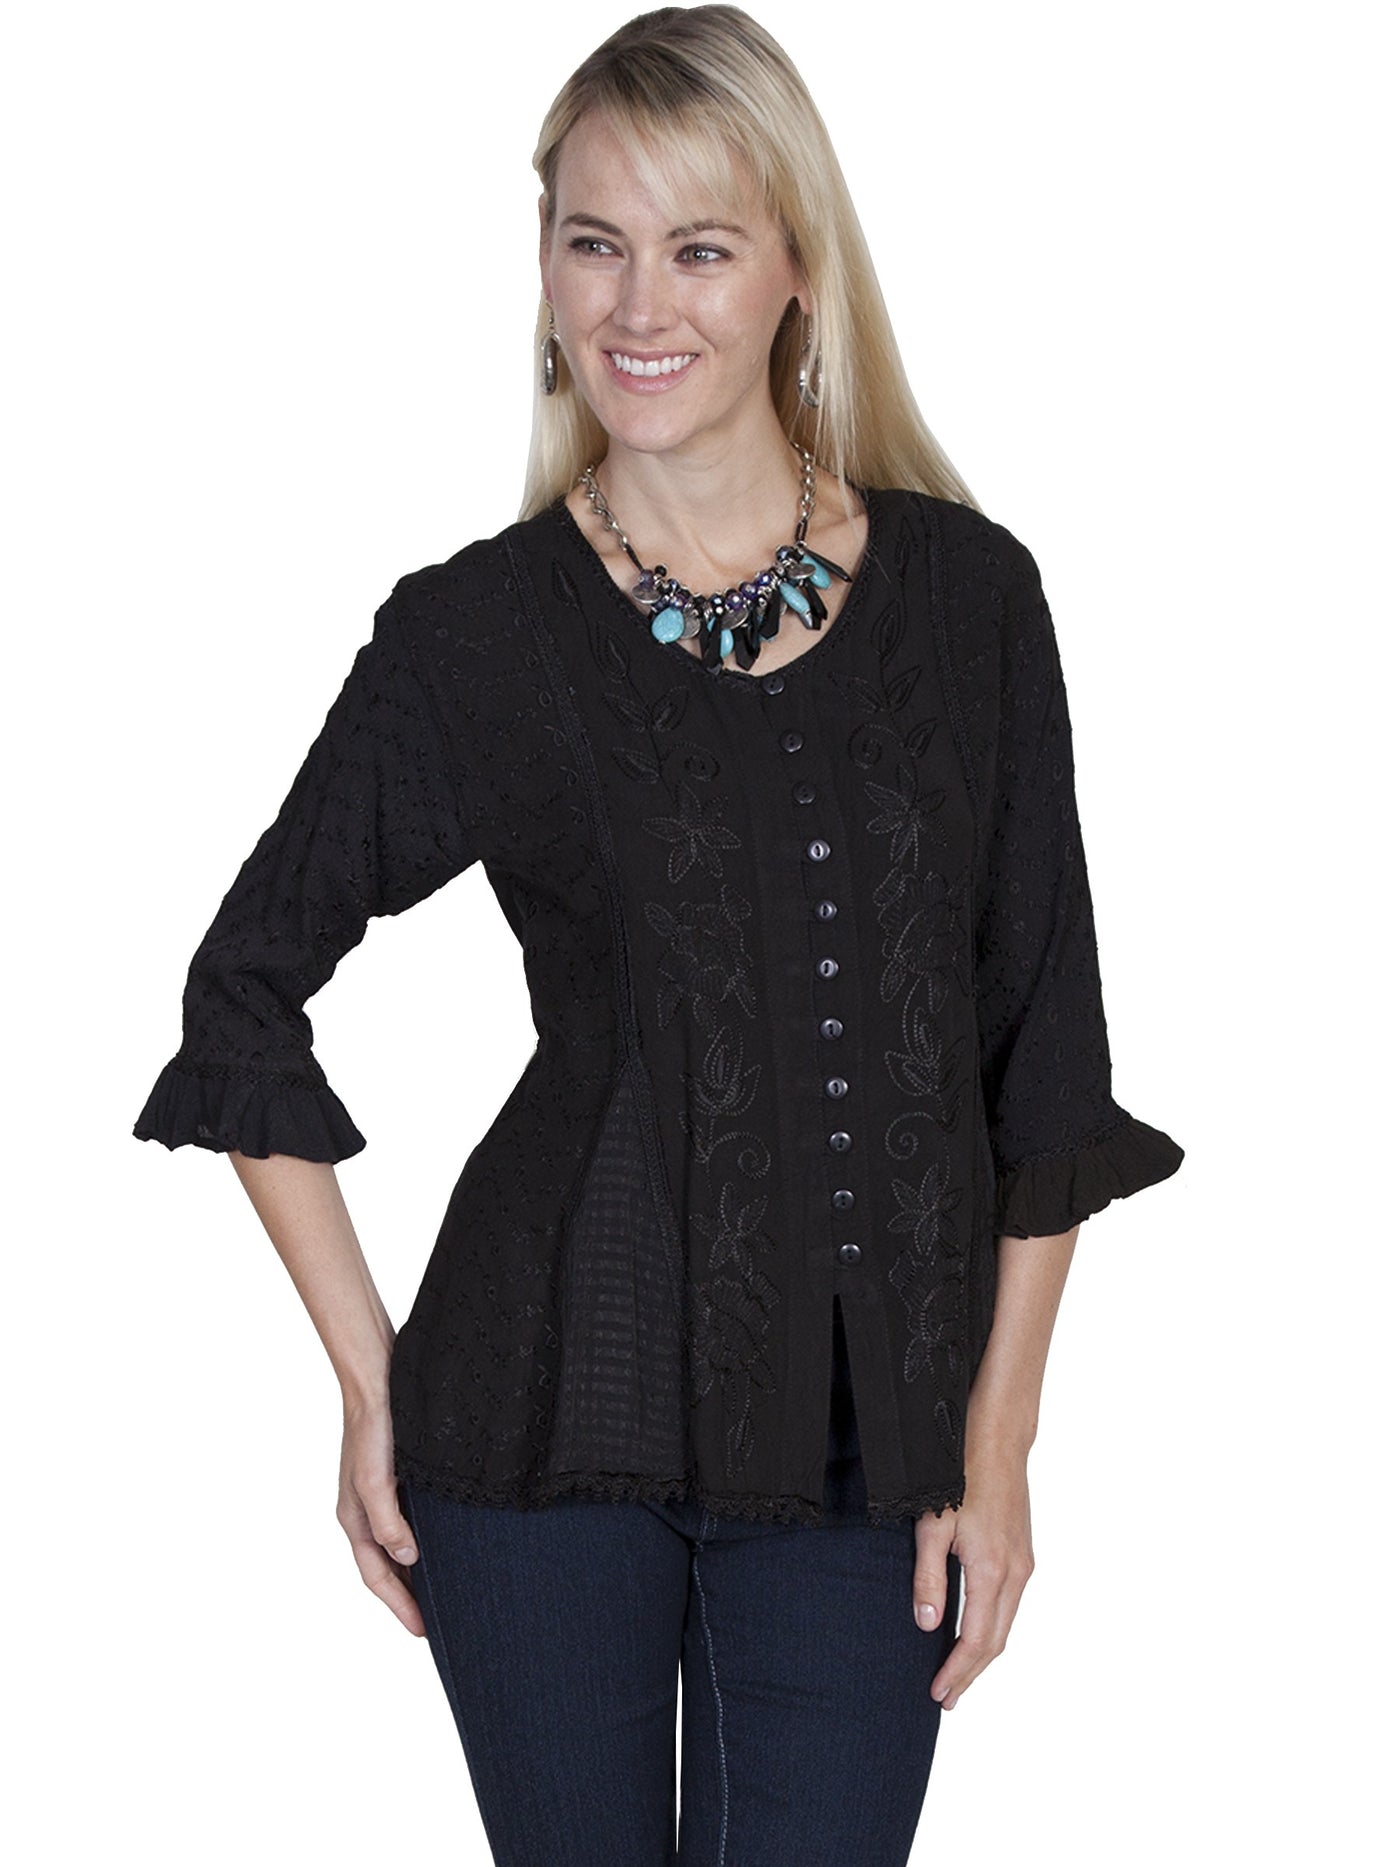 Cowgirl Multi-Fabric Blouse in Black - SOLD OUT